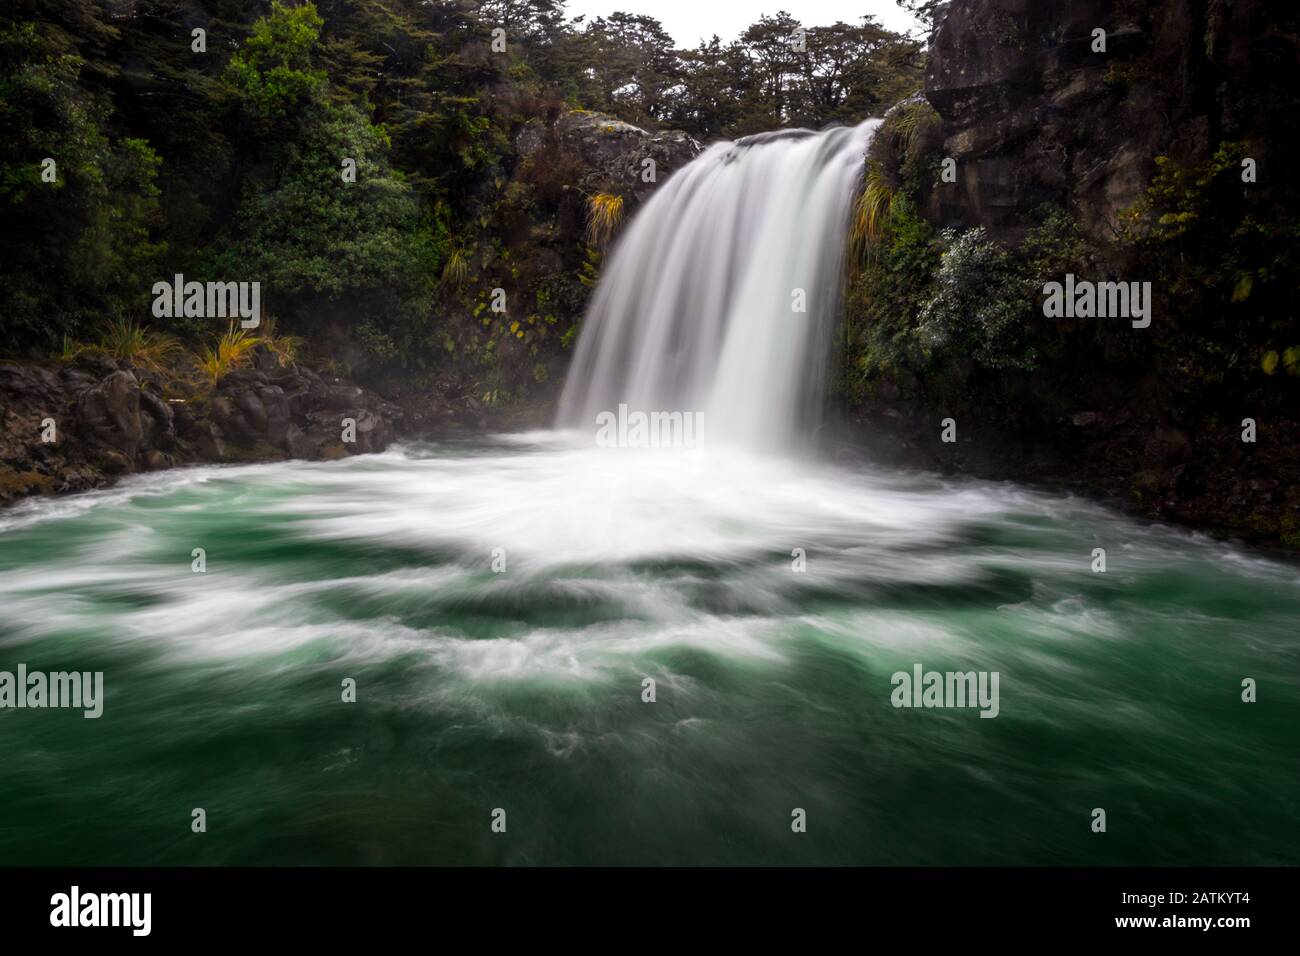 View on beautiful powerful waterfall where Lord of The Rings scene with Golum took place. Native flora surrounds scene. Tongariro National Park, New Z Stock Photo